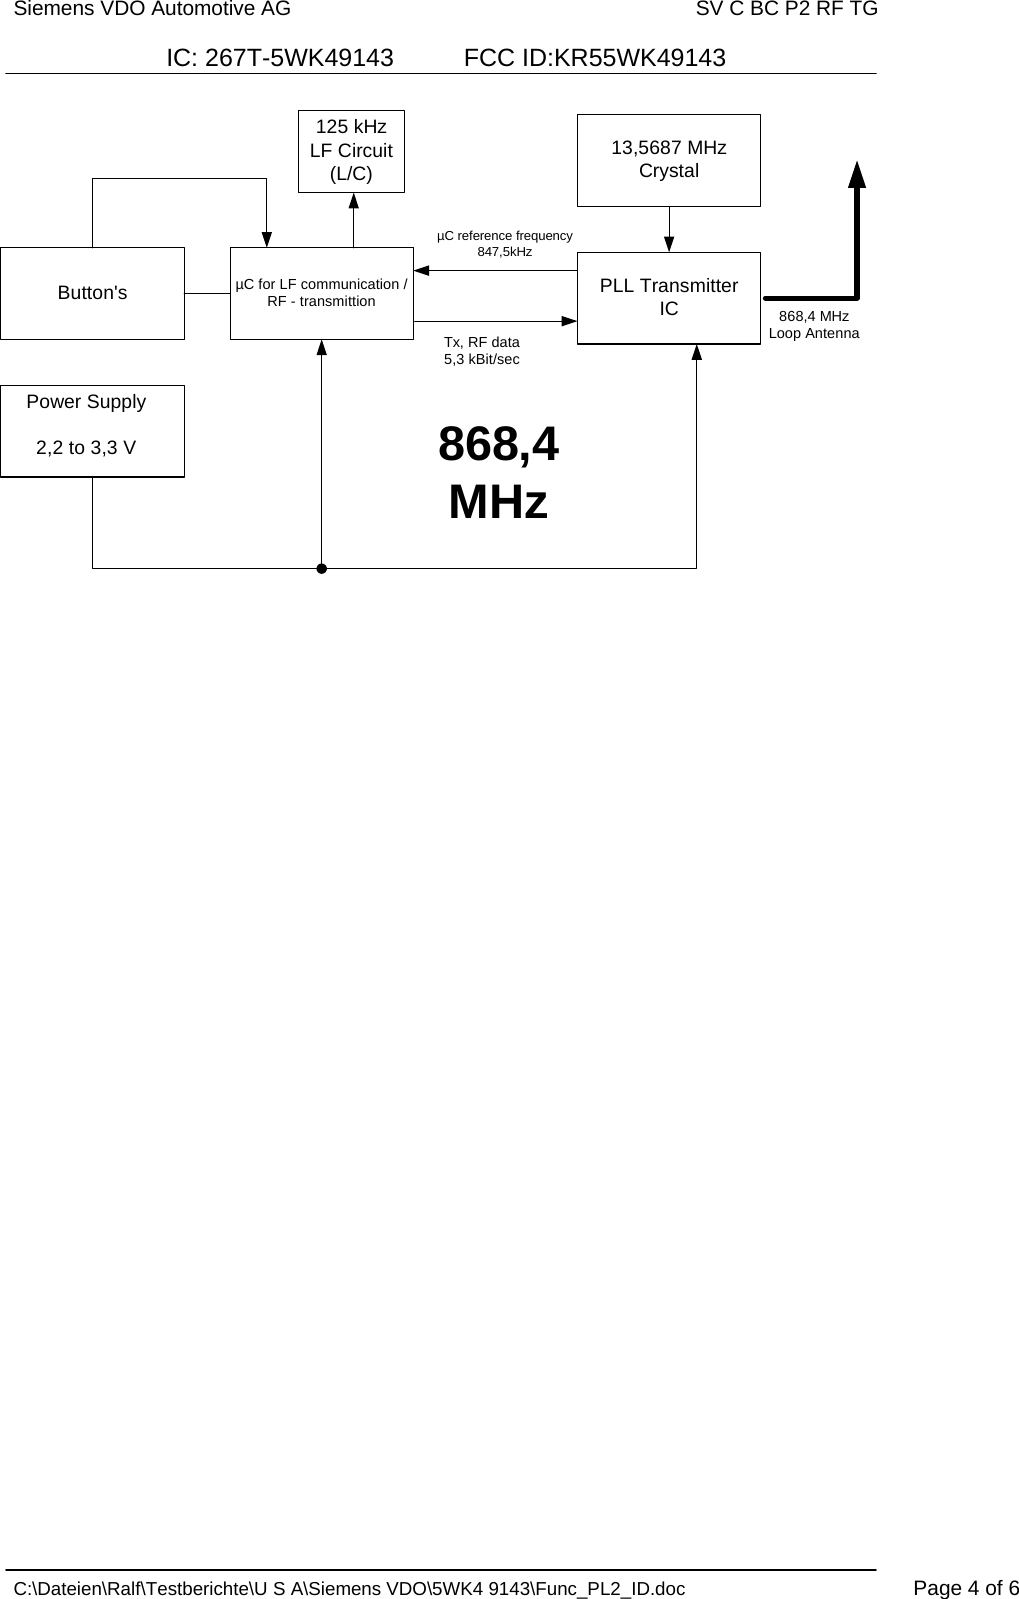 Siemens VDO Automotive AG   SV C BC P2 RF TG  IC: 267T-5WK49143          FCC ID:KR55WK49143   C:\Dateien\Ralf\Testberichte\U S A\Siemens VDO\5WK4 9143\Func_PL2_ID.doc  Page 4 of 6          Button&apos;s PLL TransmitterIC13,5687 MHzCrystal125 kHzLF Circuit(L/C)µC for LF communication /RF - transmittionPower Supply2,2 to 3,3 VµC reference frequency847,5kHzTx, RF data5,3 kBit/sec868,4MHz868,4 MHzLoop Antenna